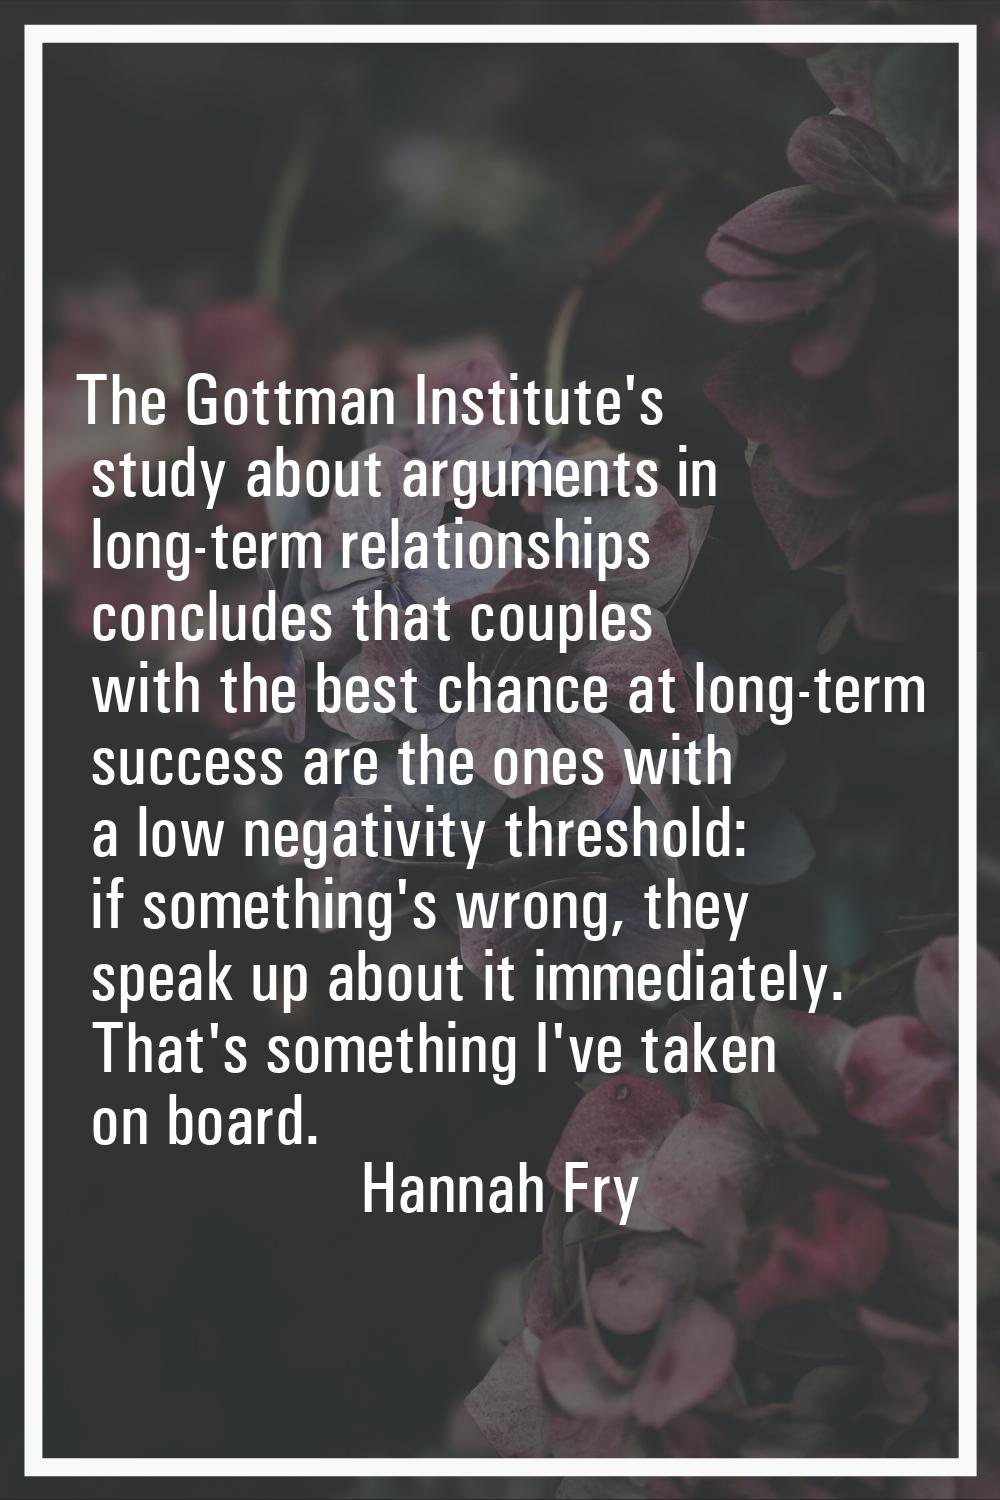 The Gottman Institute's study about arguments in long-term relationships concludes that couples wit